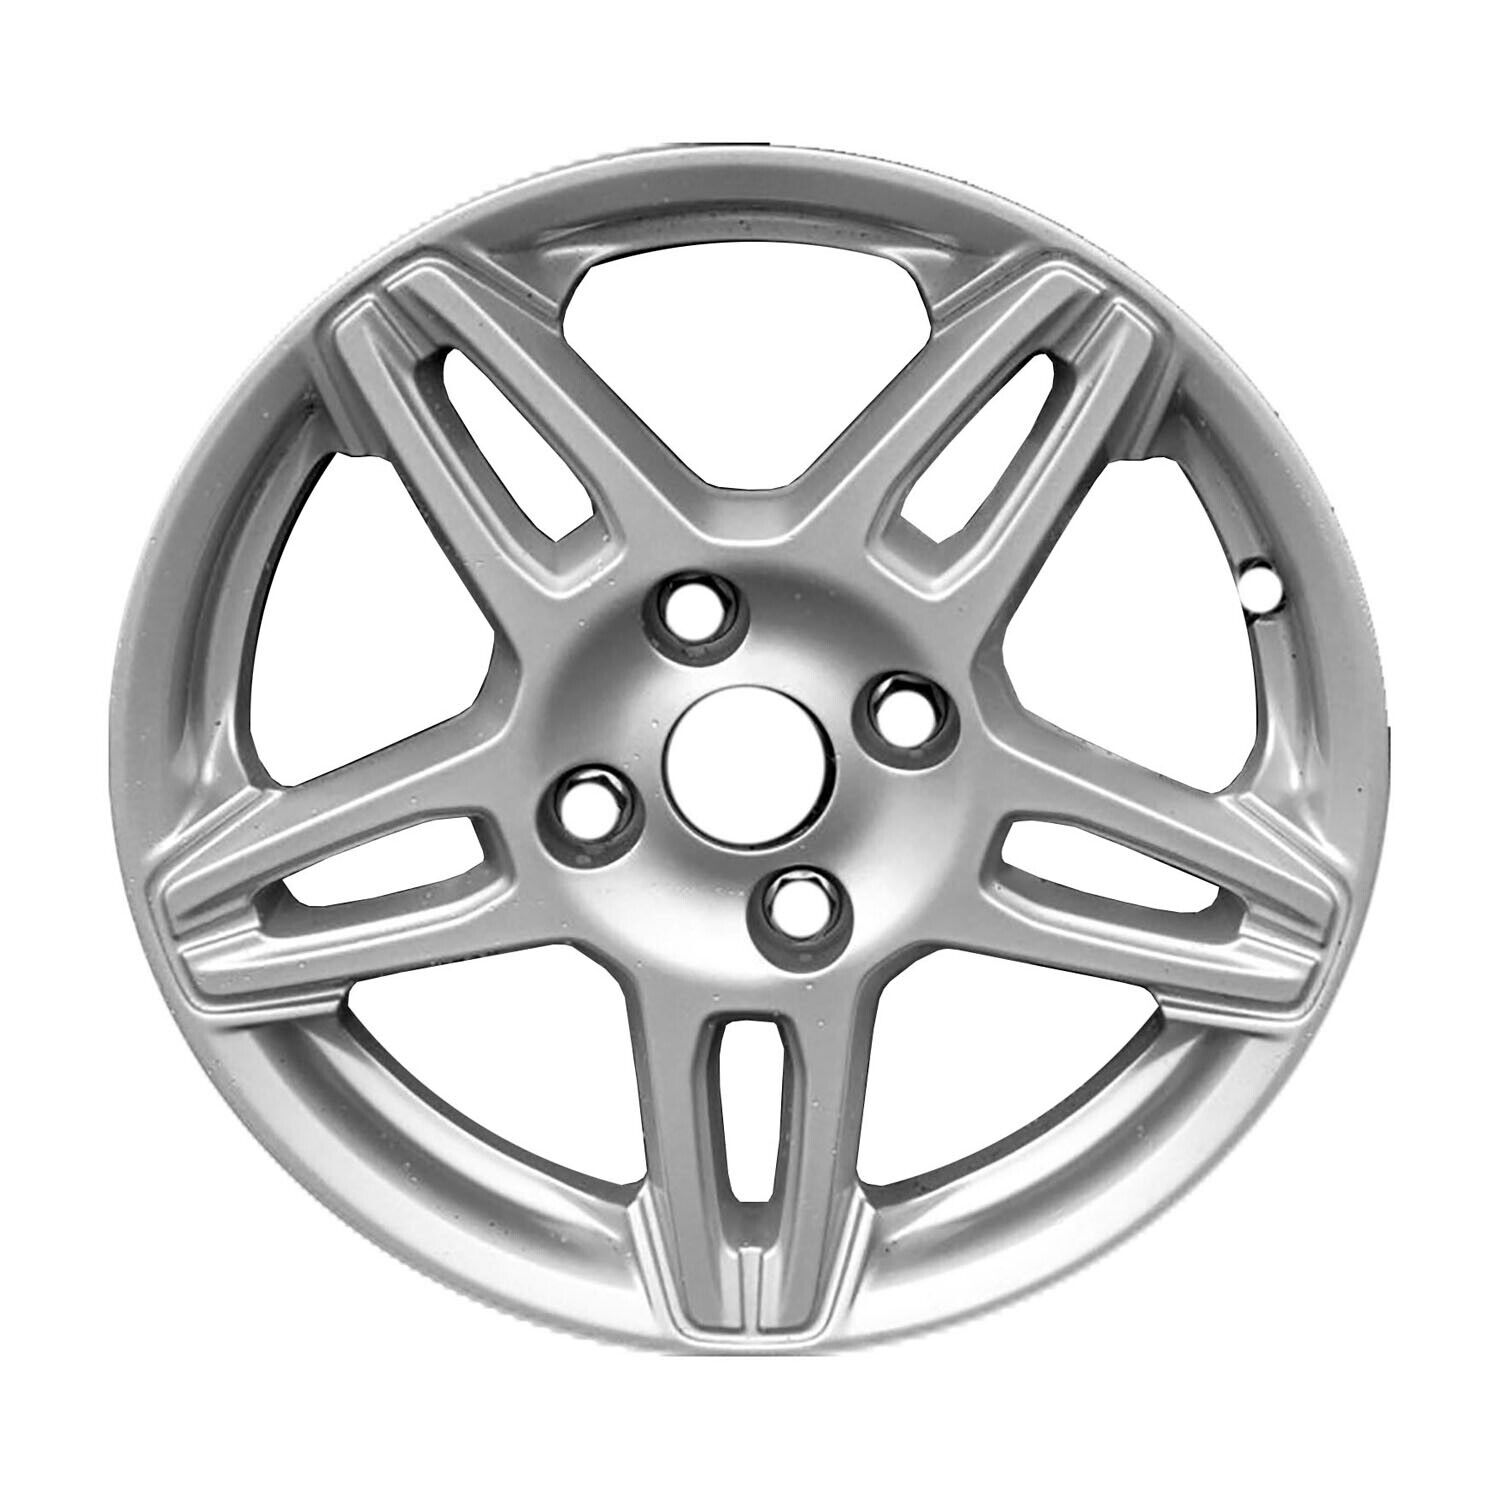 Reconditioned 15x6 Painted Silver Wheel fits 560-10117